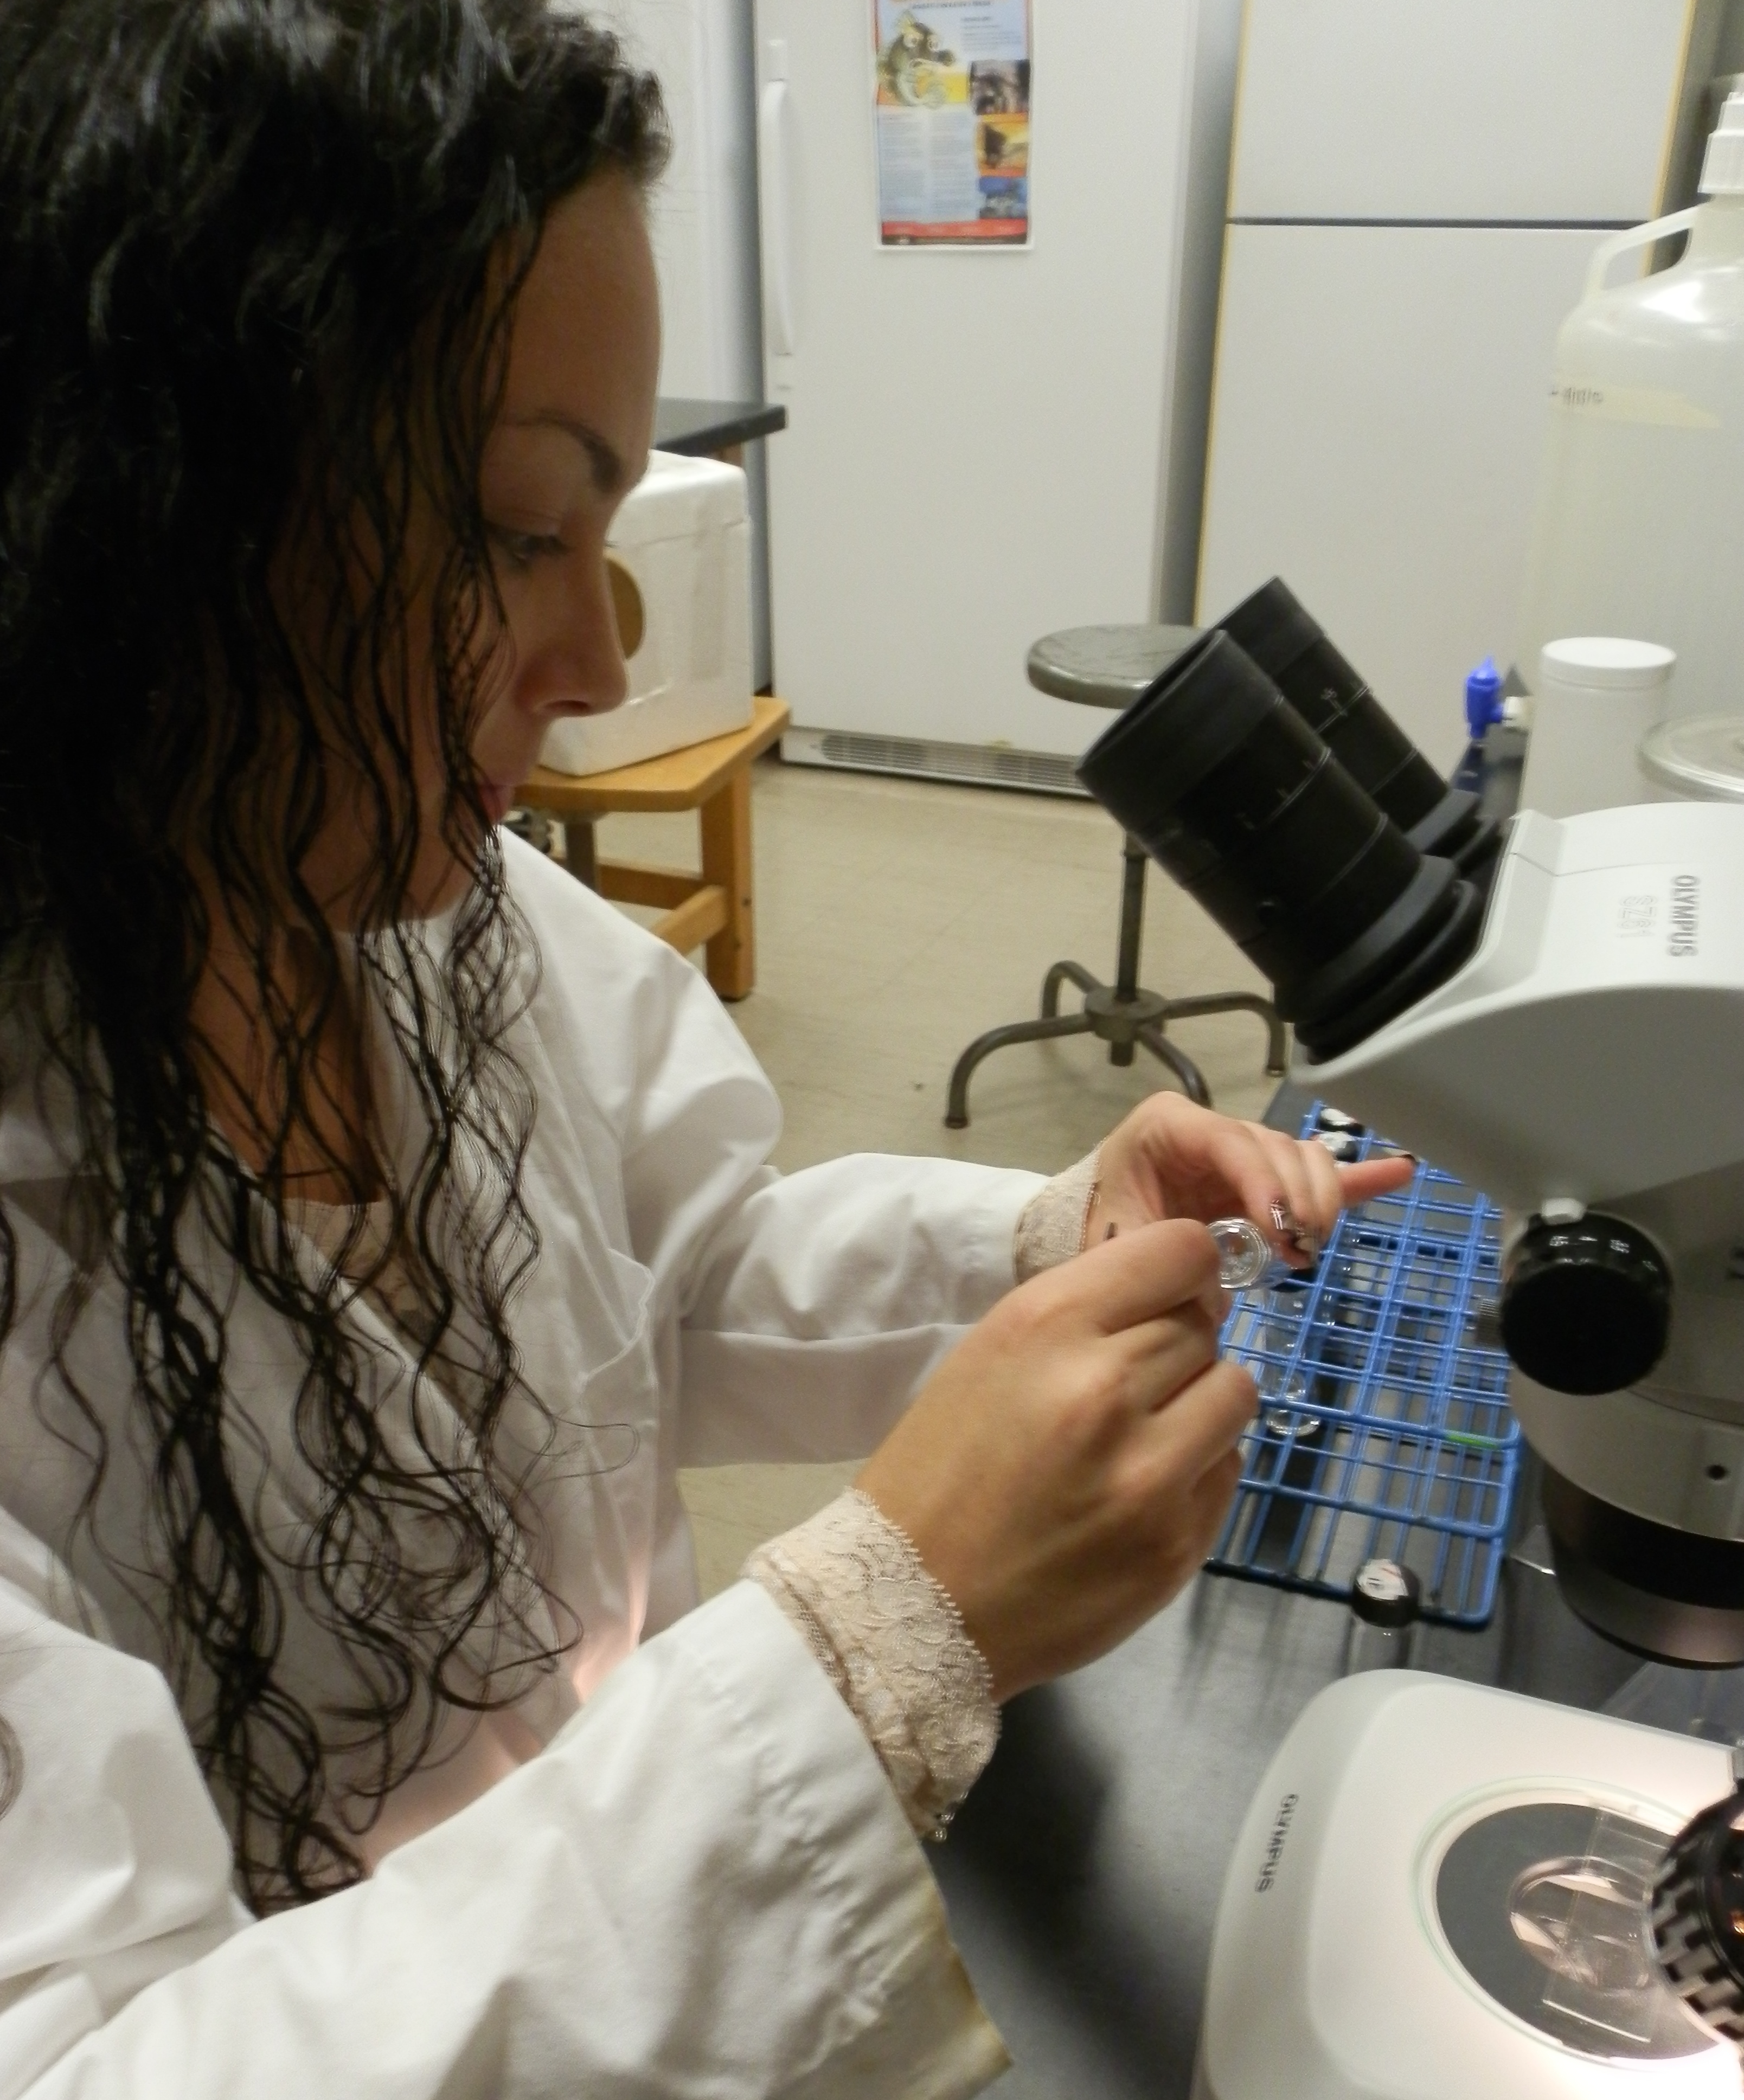 a person in a lab coat examining something under a microscope